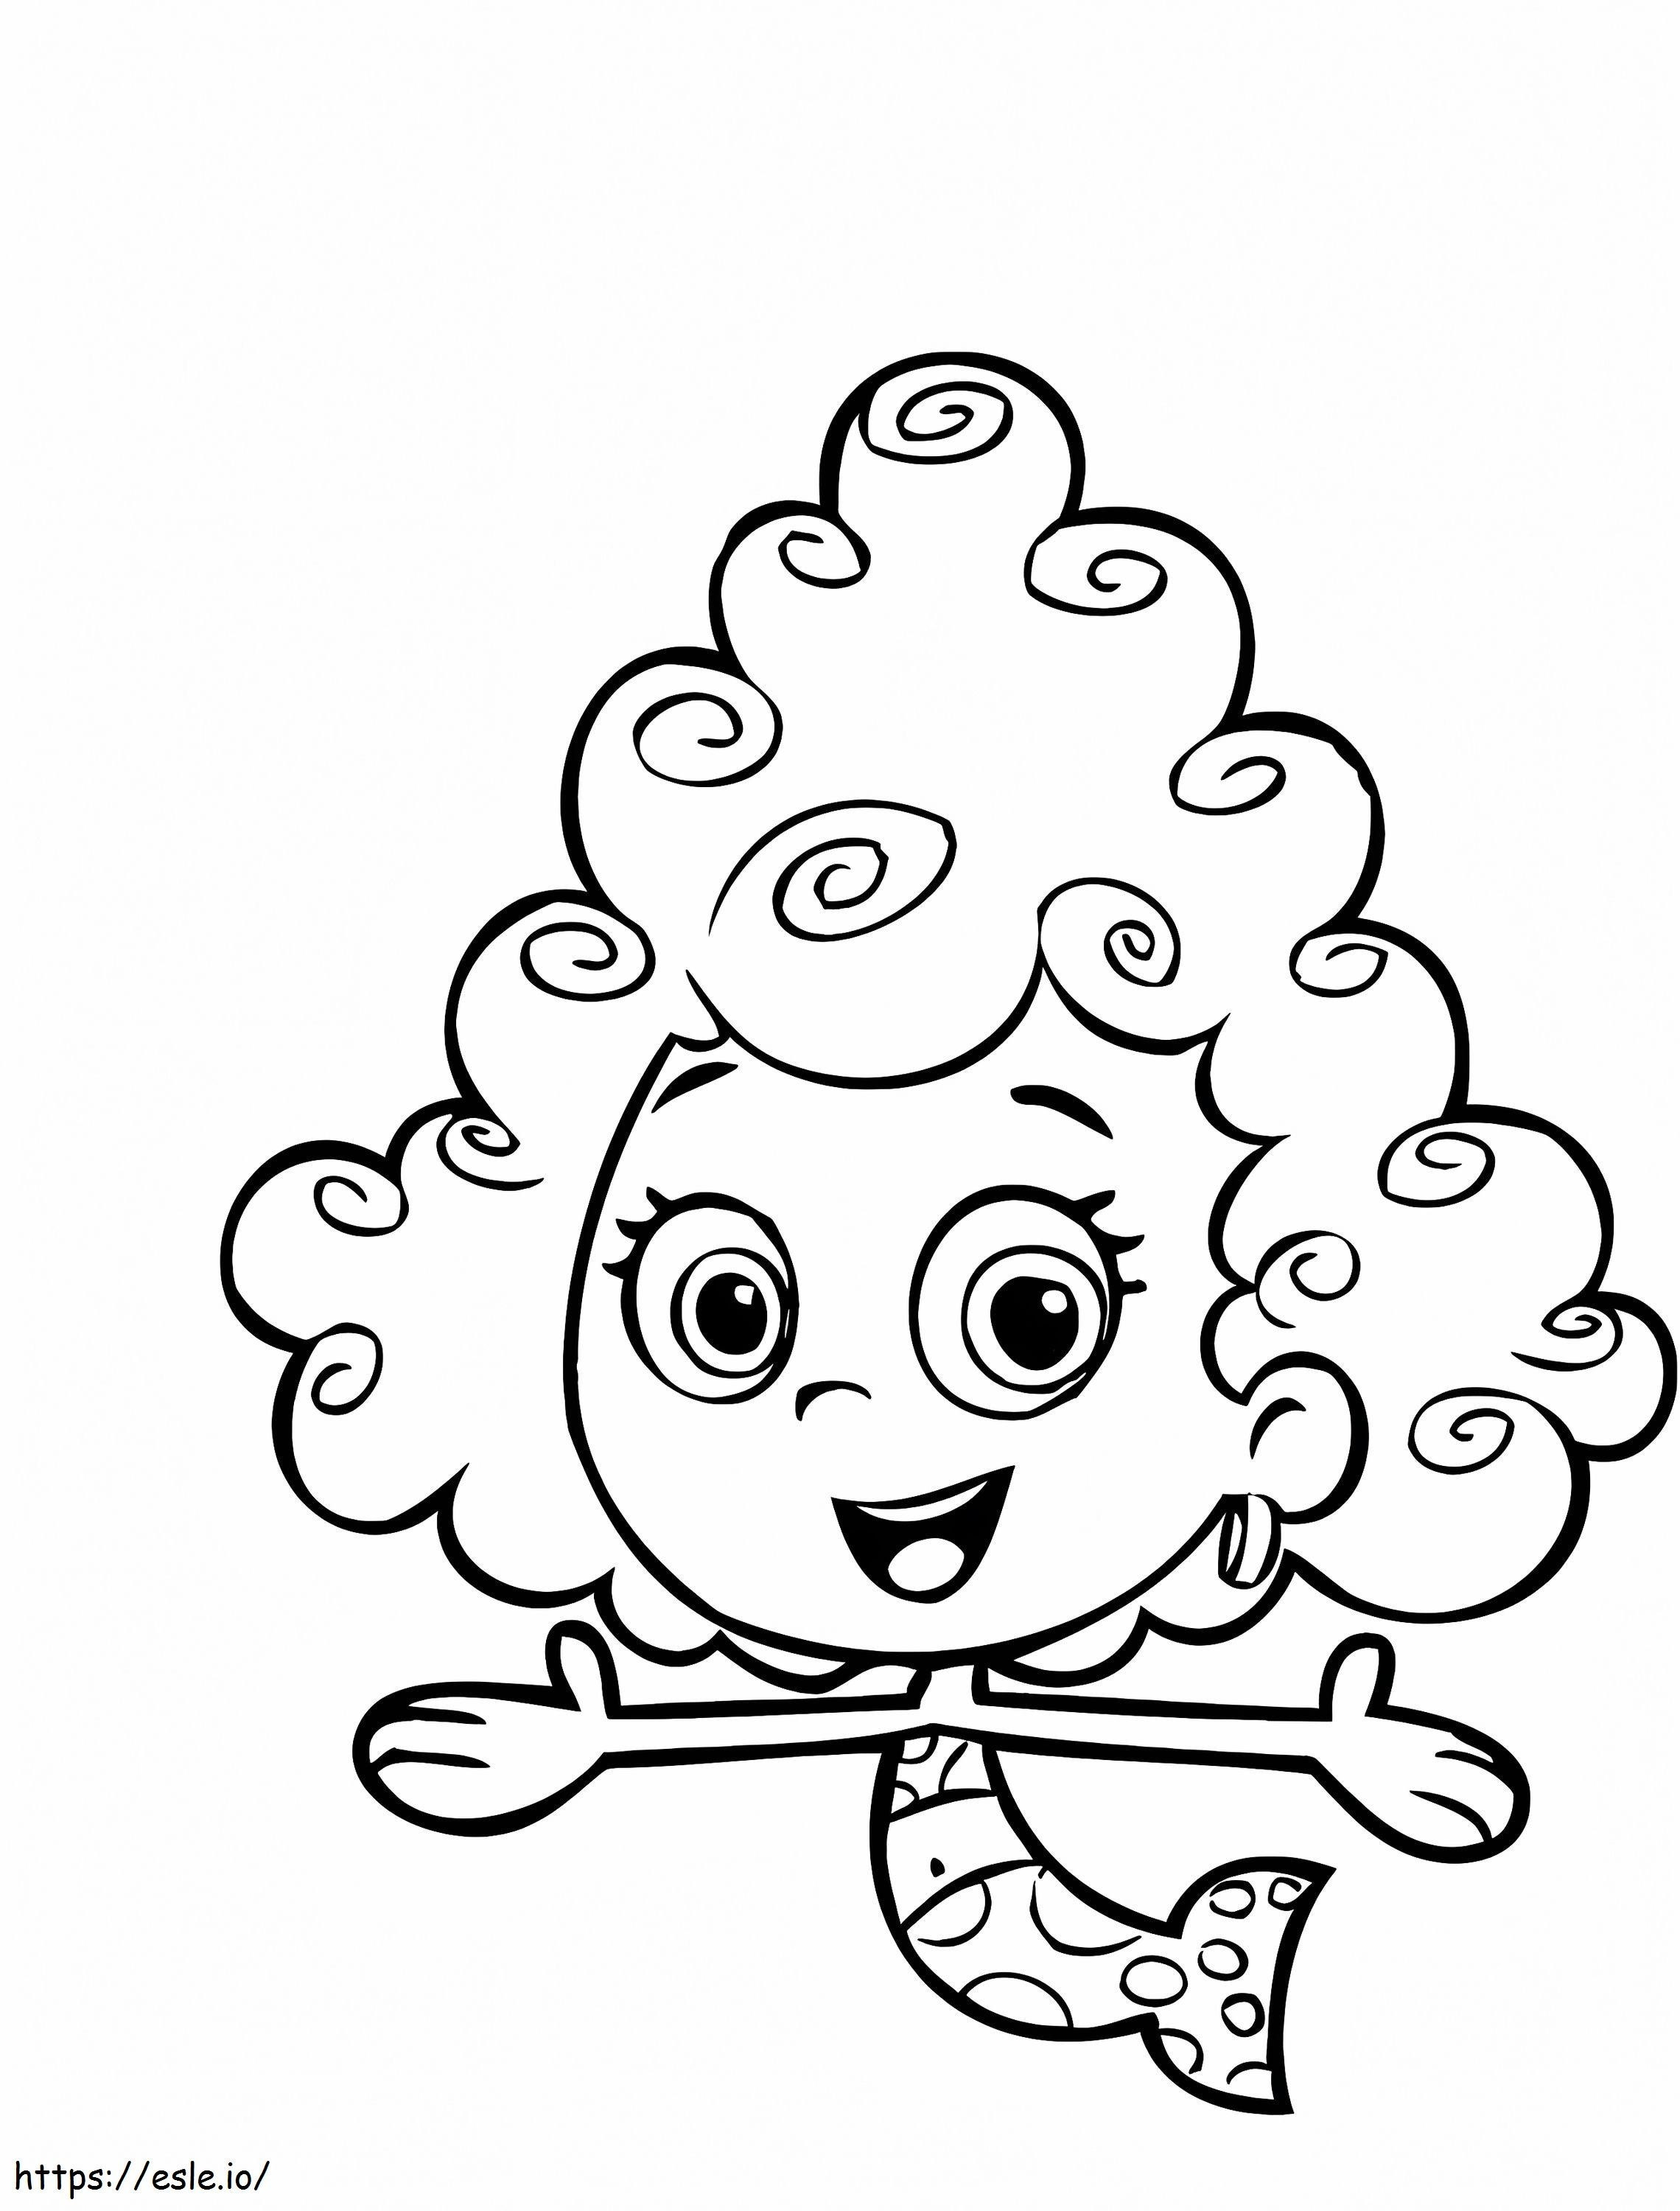 Funny Deema A4 coloring page